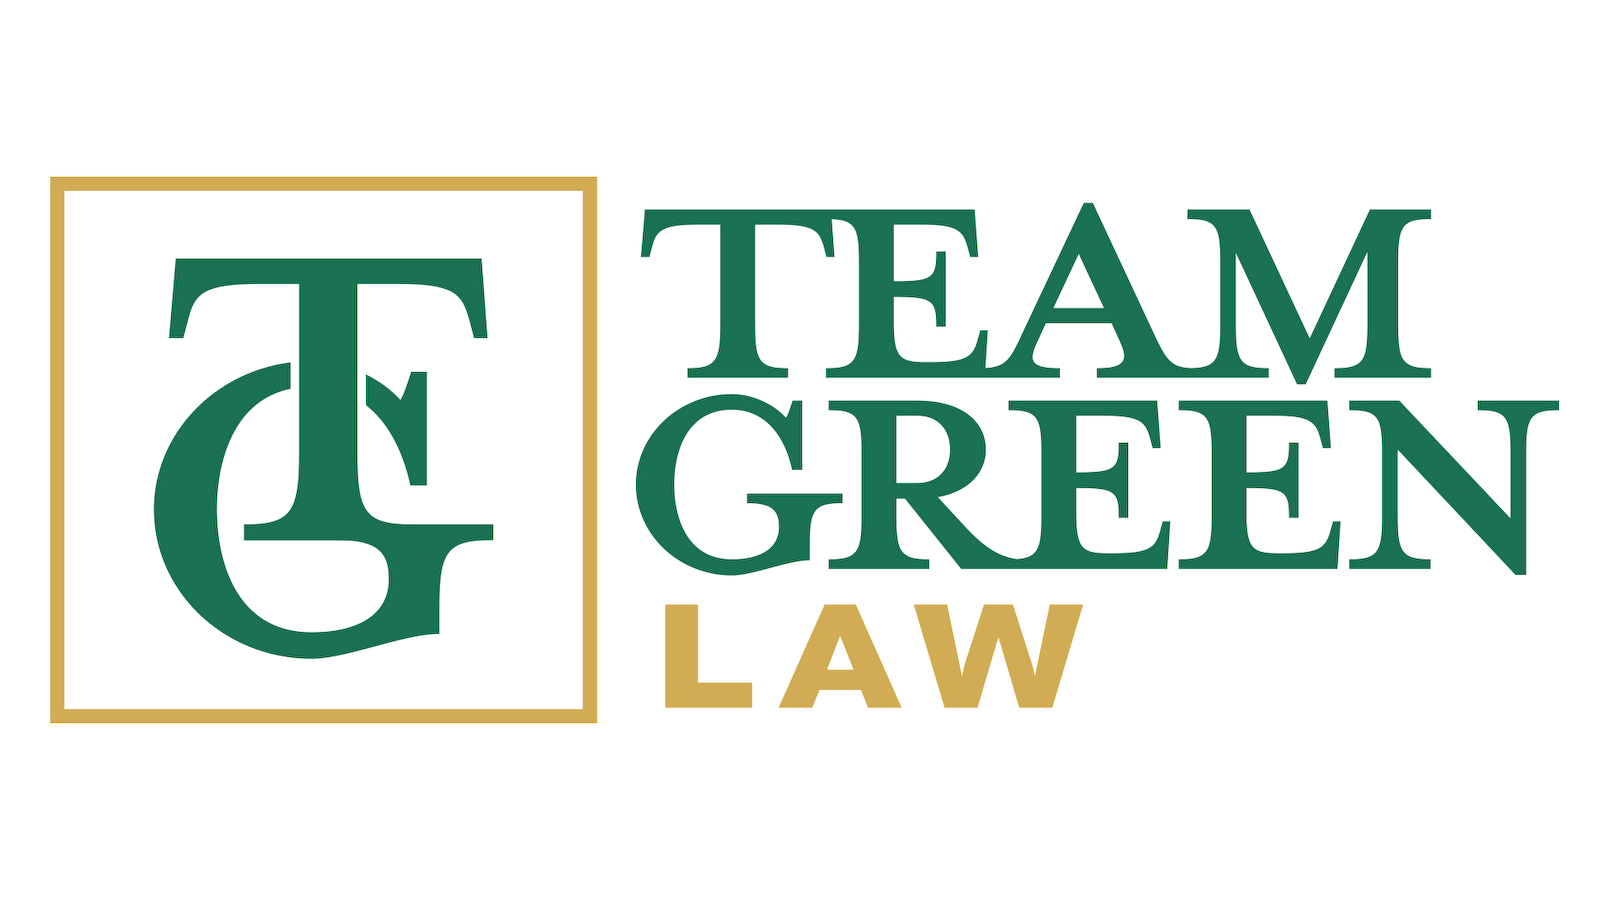 See the difference local personal injury experience makes. Team Green Law.